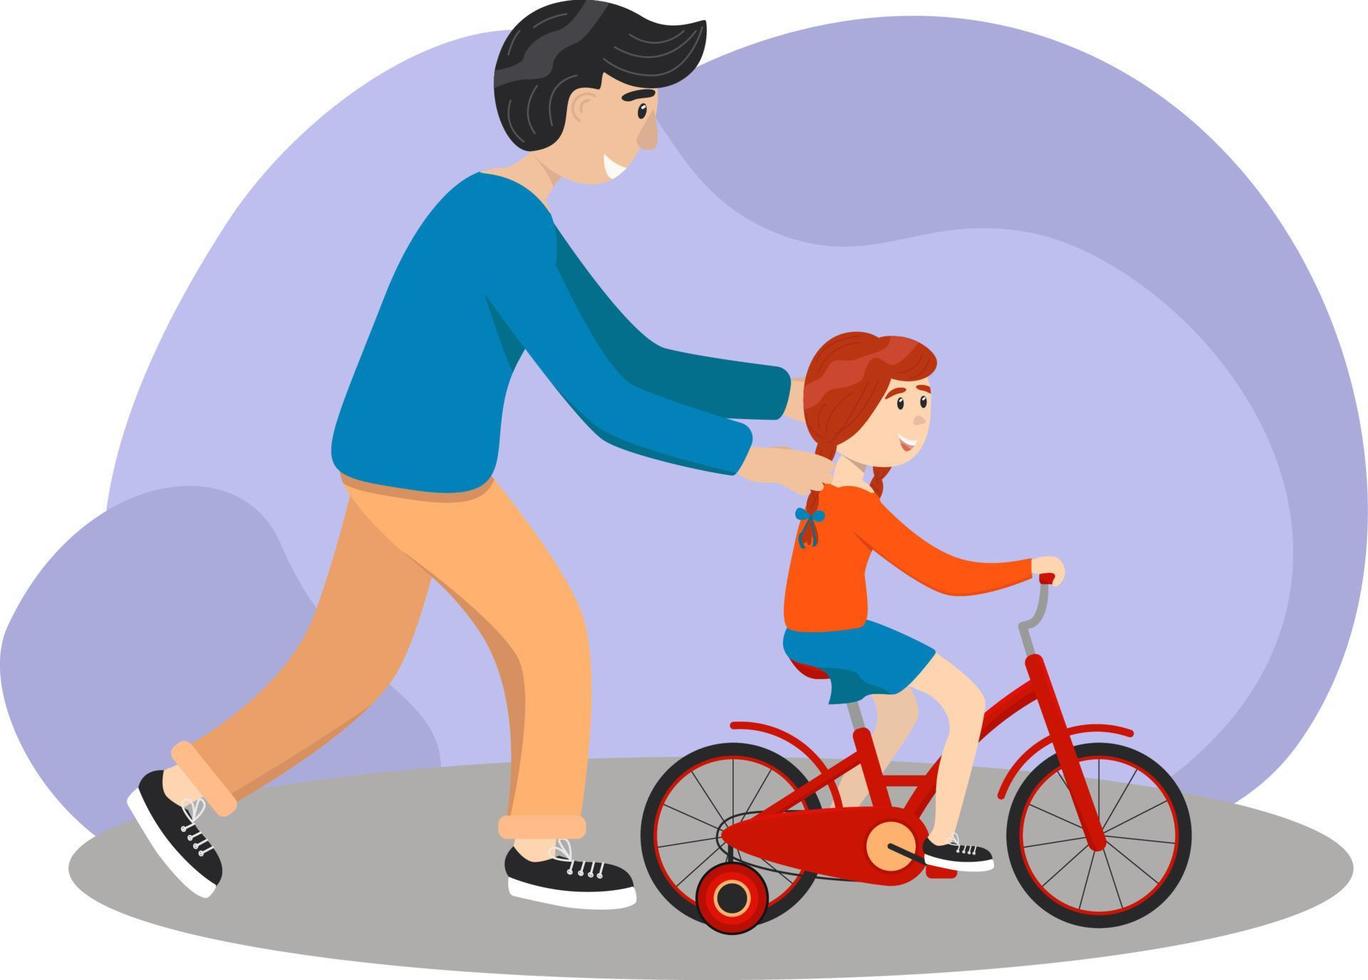 Father teaches daughter to ride a bike. Kid learns to ride bicycle. Parenting concept. Father help his girl kid learning to ride a bicycle at countryside together. Stock vector illustration, eps 10.